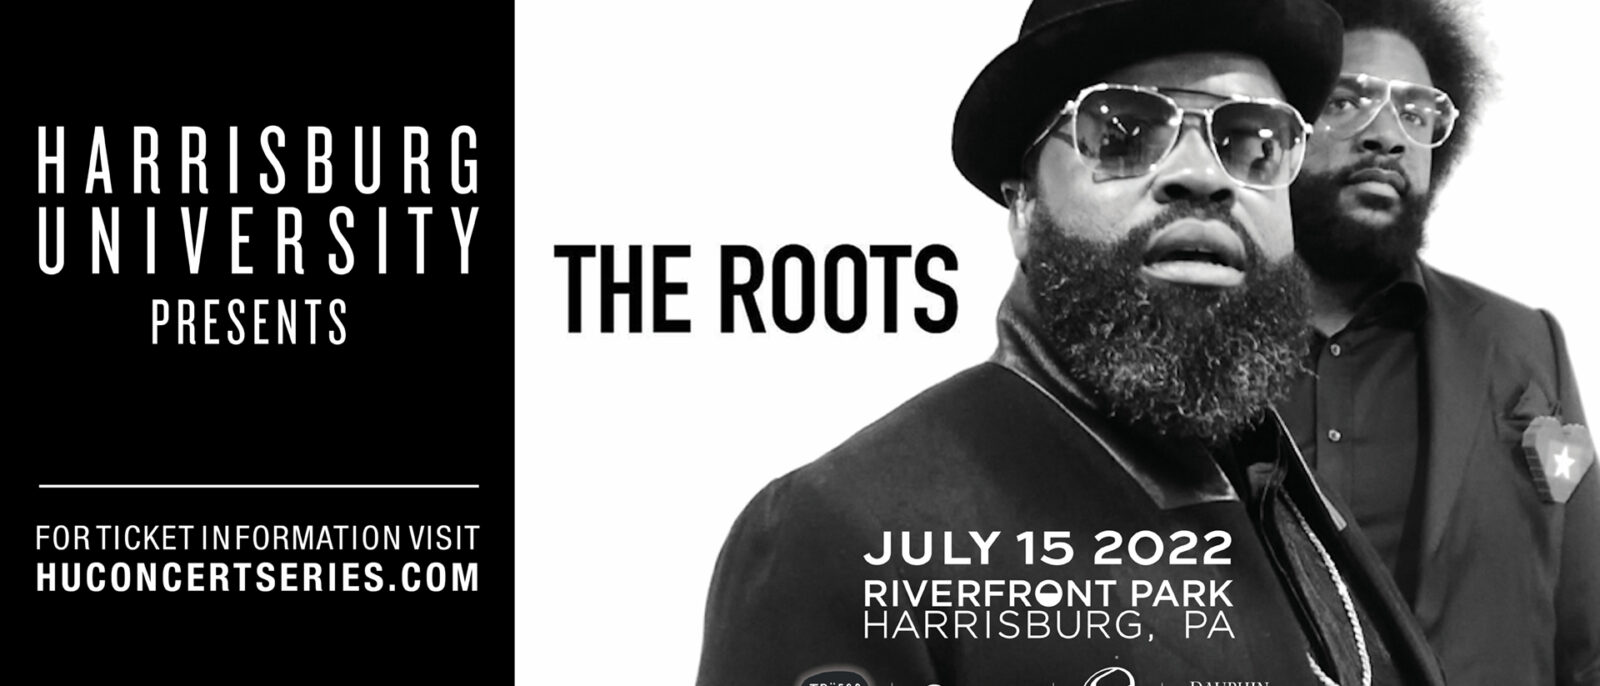 HU Presents The Roots at Riverfront Park